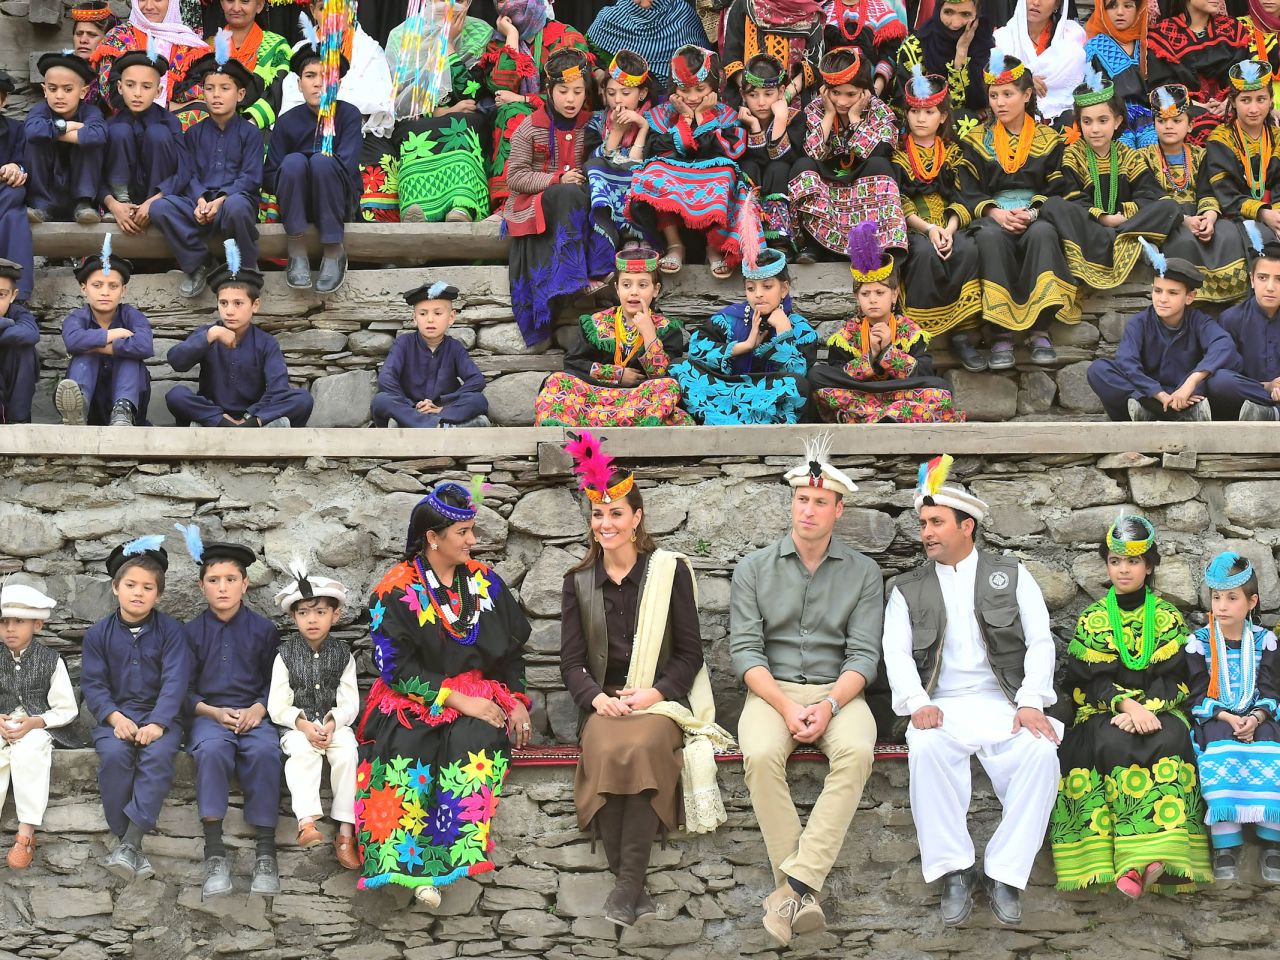 William and Kate visit a settlement of the Kalash people in Chitral, Pakistan, on October 16, 2019.